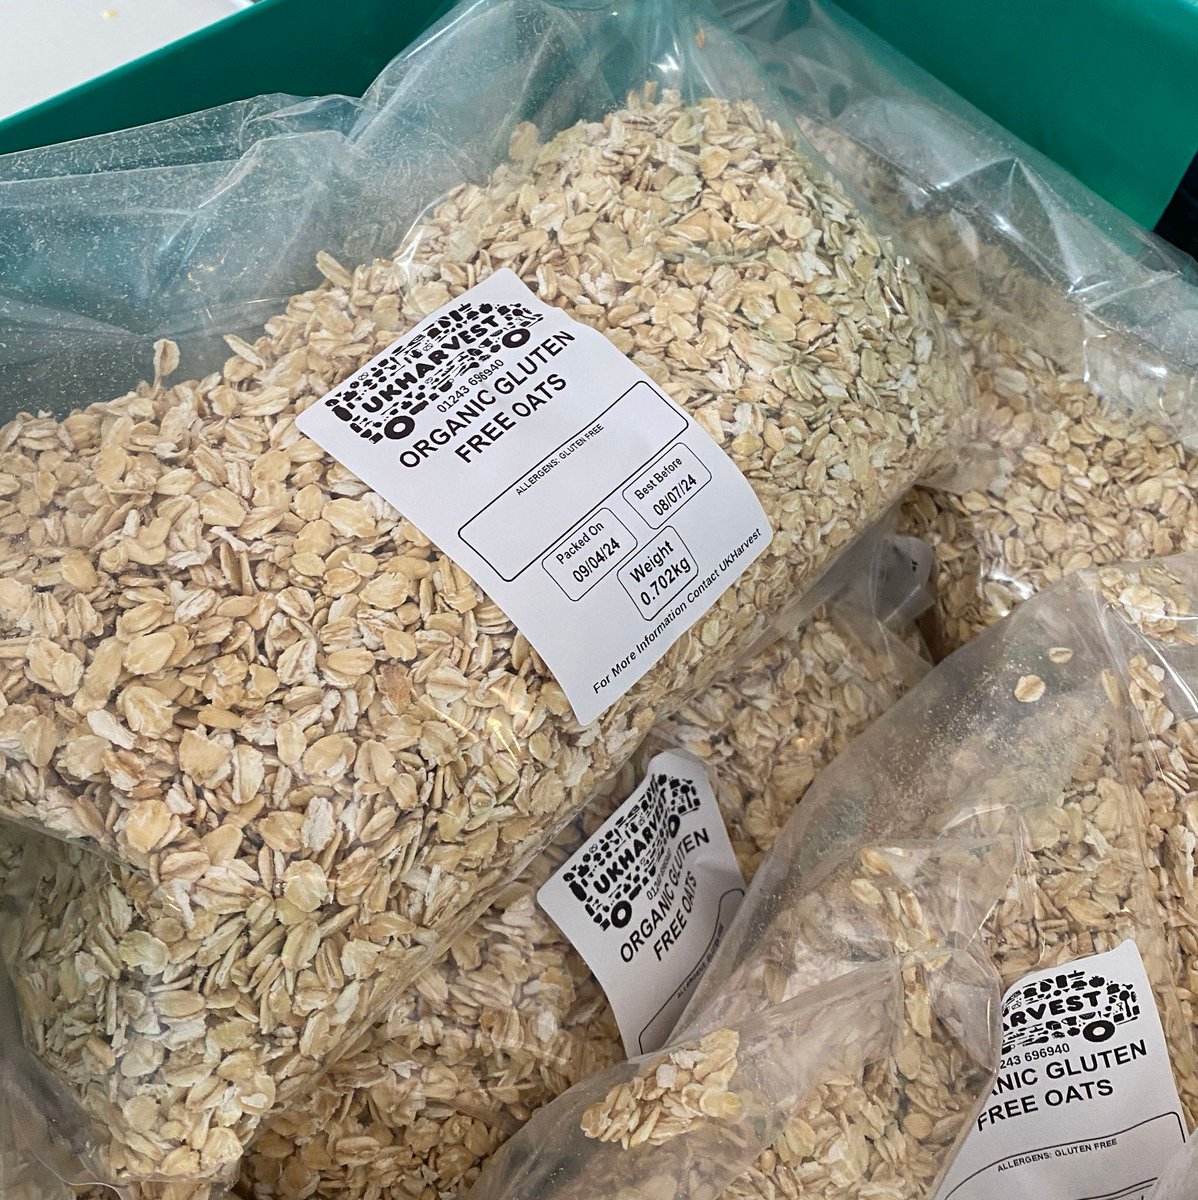 We've had oat-standing support from our #volunteers, repacking large bags of oats from @infinityfoodsw into portions that are perfect for our Community Food Hub customers. Thank you to everyone including @BarfootsUK and the group from Apuldram for helping us feed our community.💛